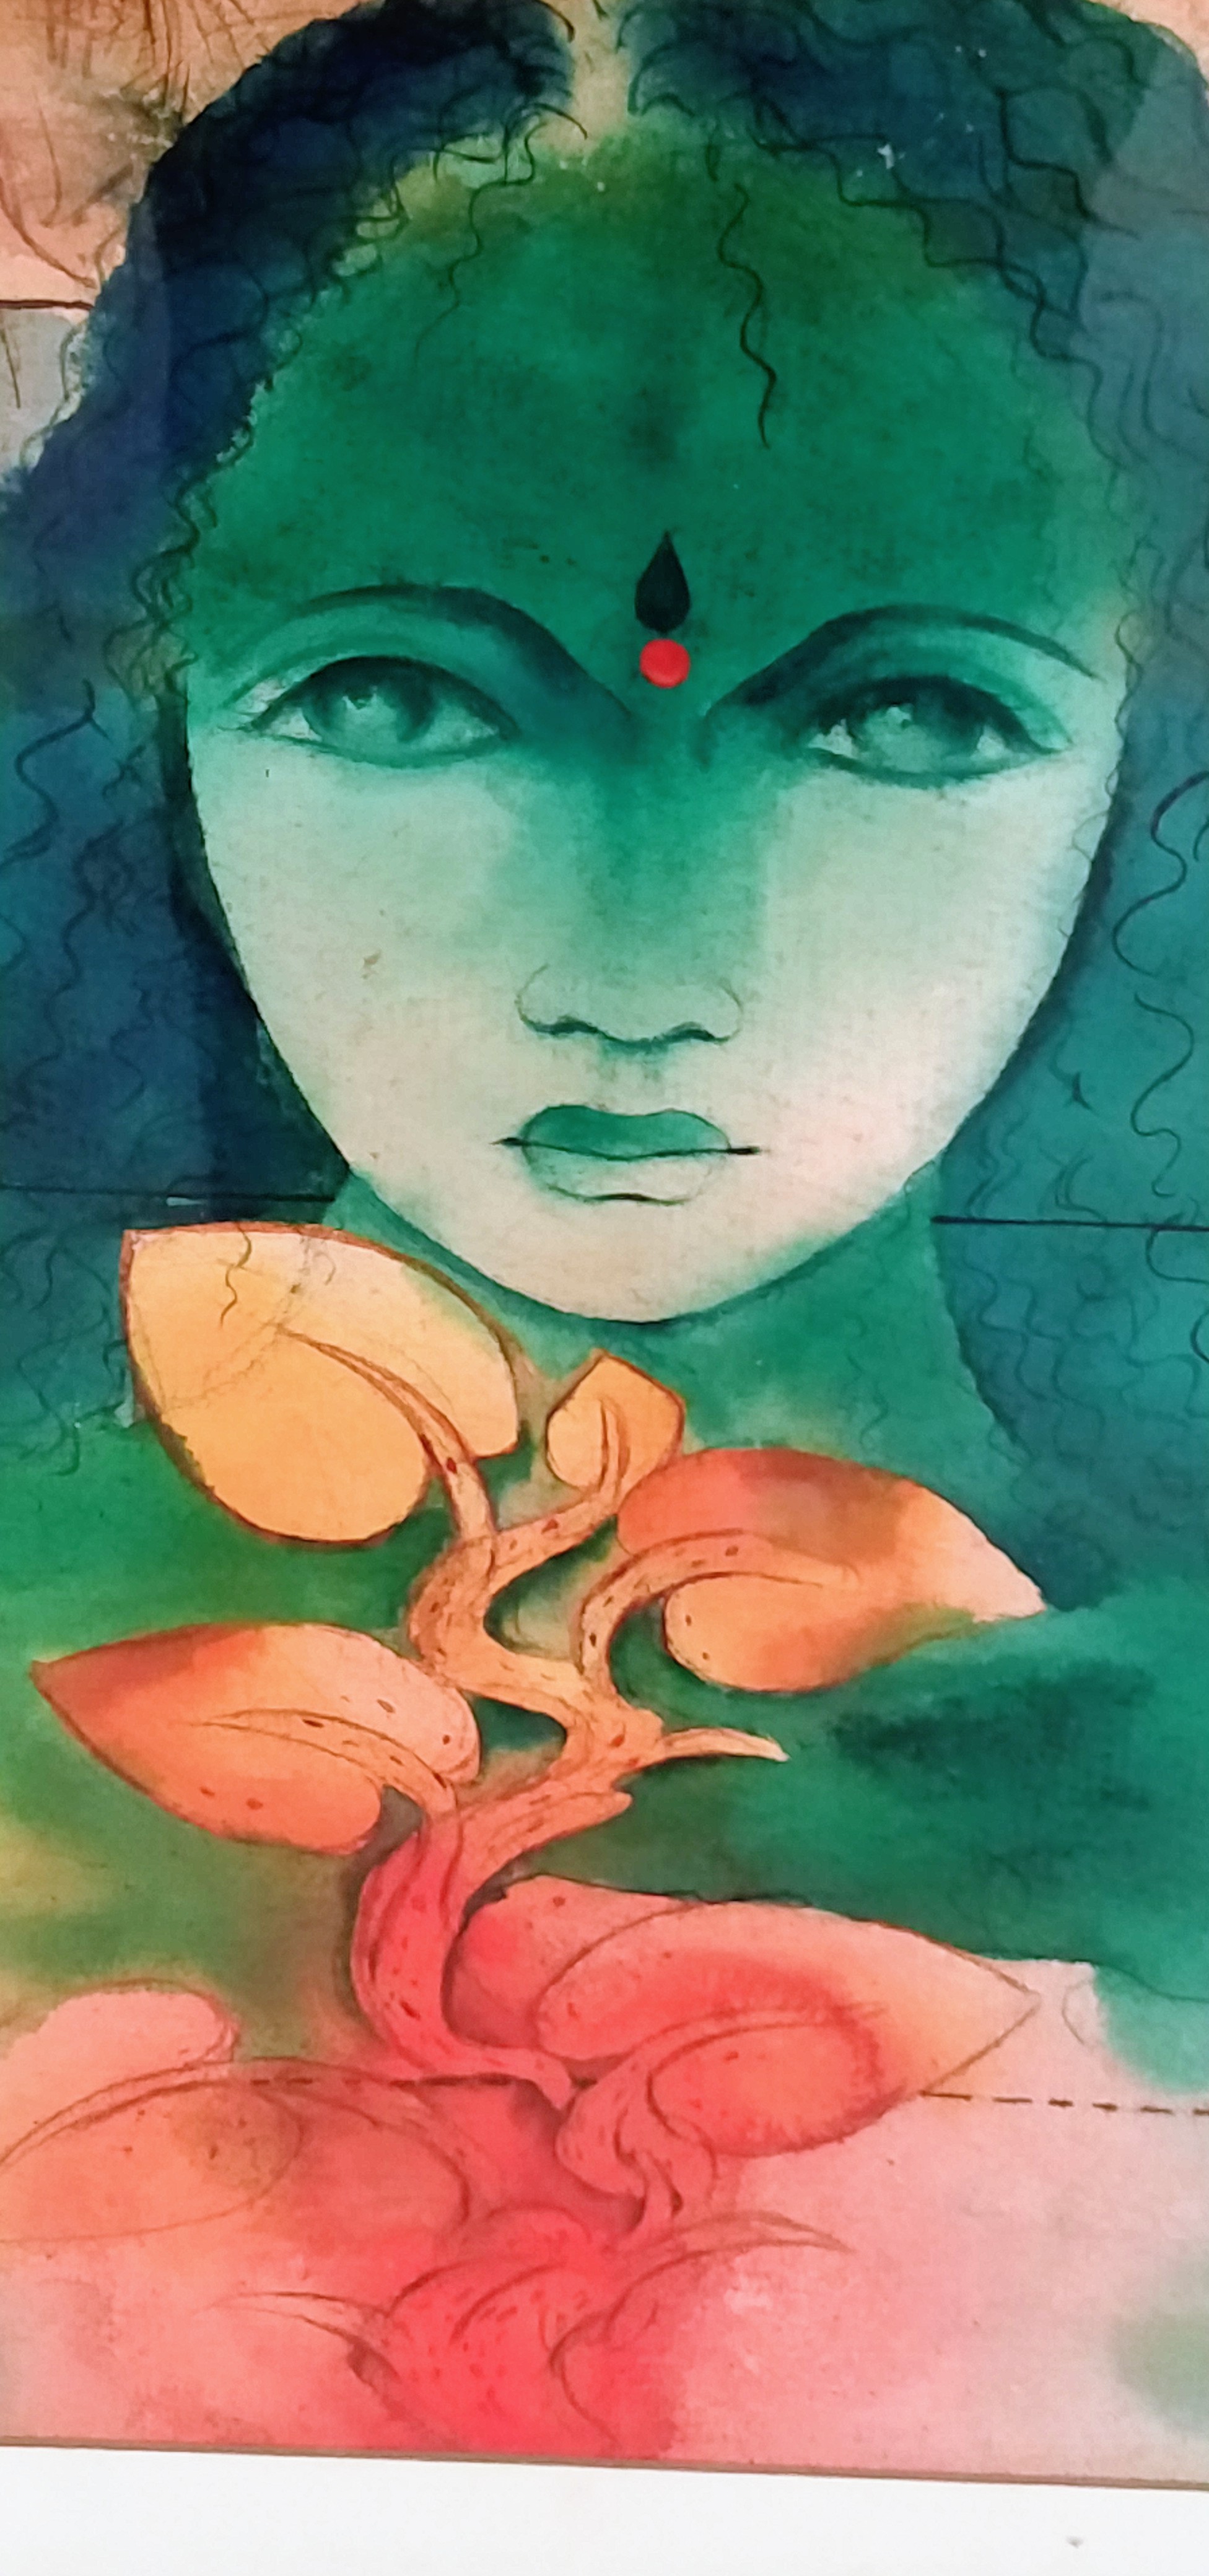 An abstract painting of a young Indian girl and an ivy plant in front of her